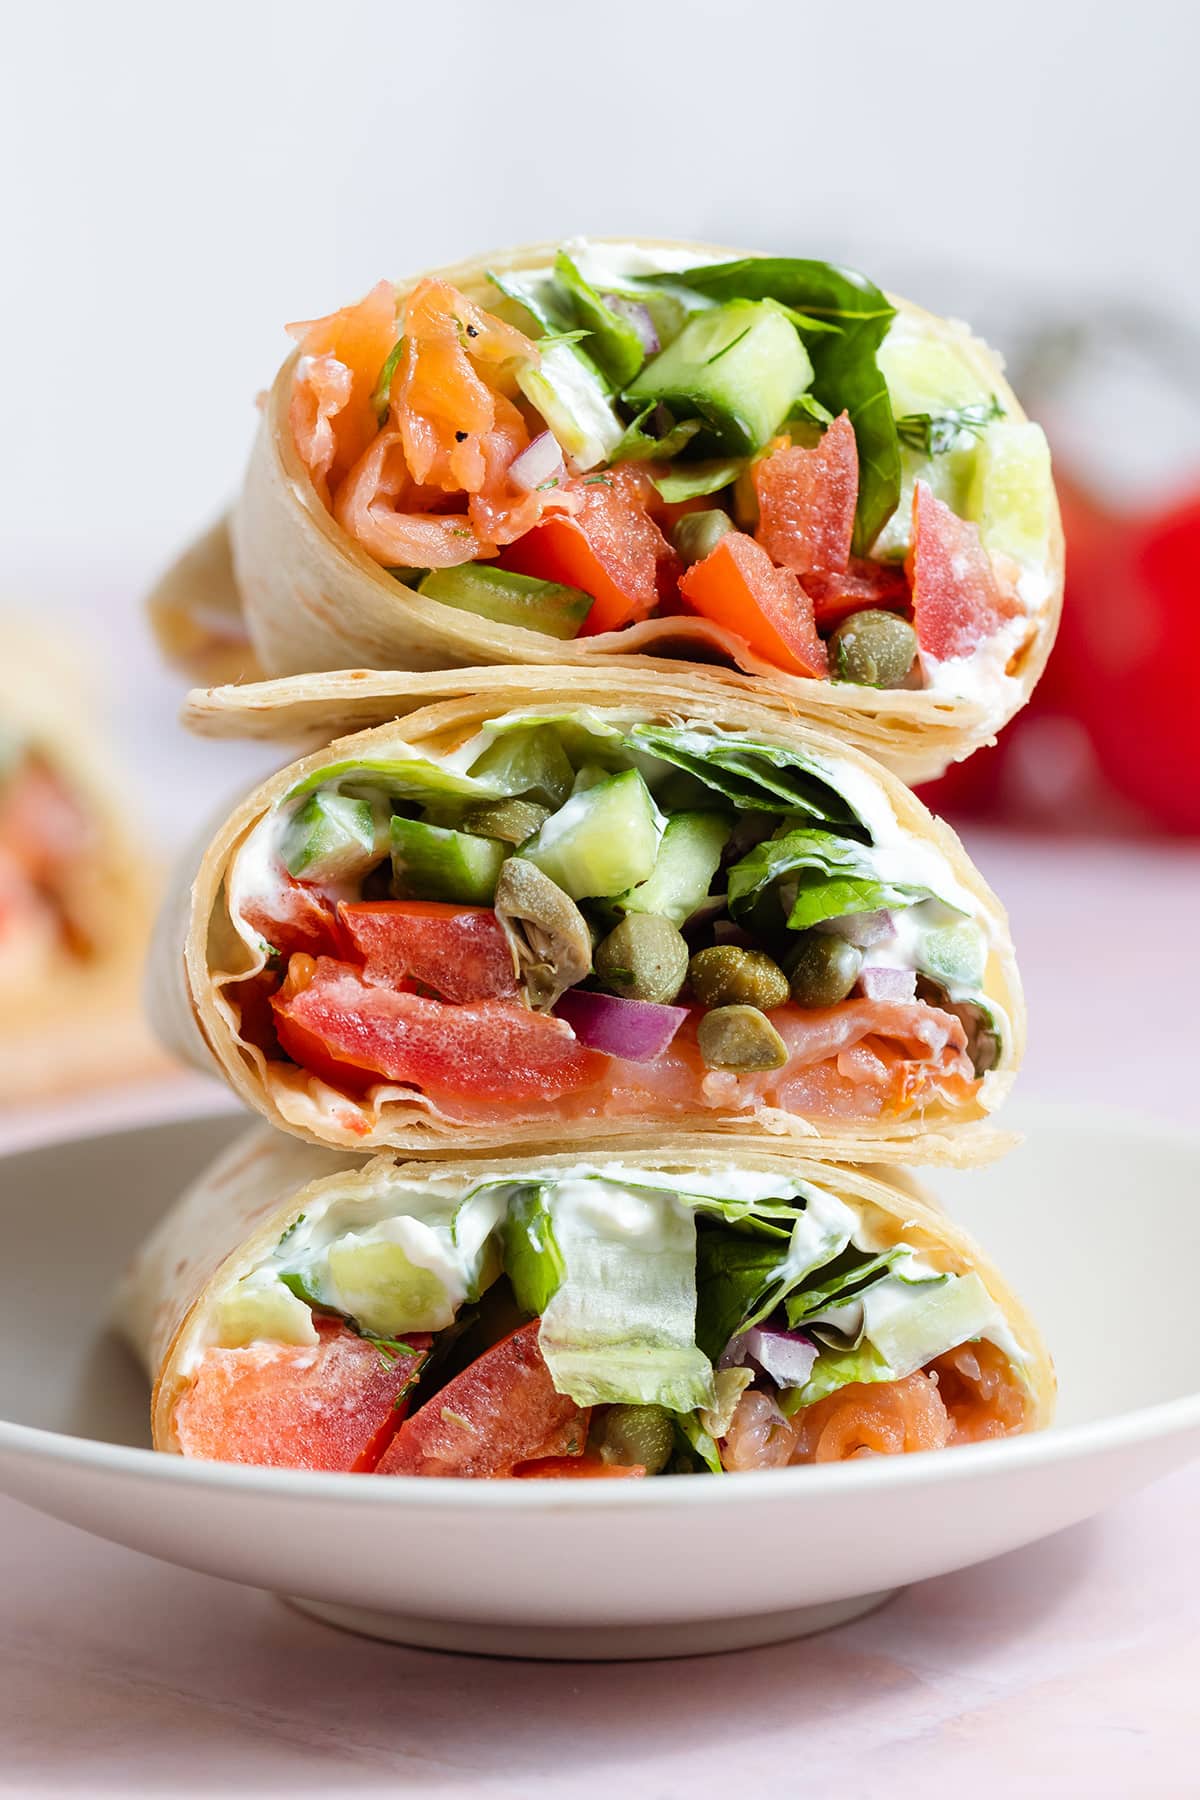 Three smoked salmon veggie wraps cut in half showing the inside stacked on top of each other on a small plate.